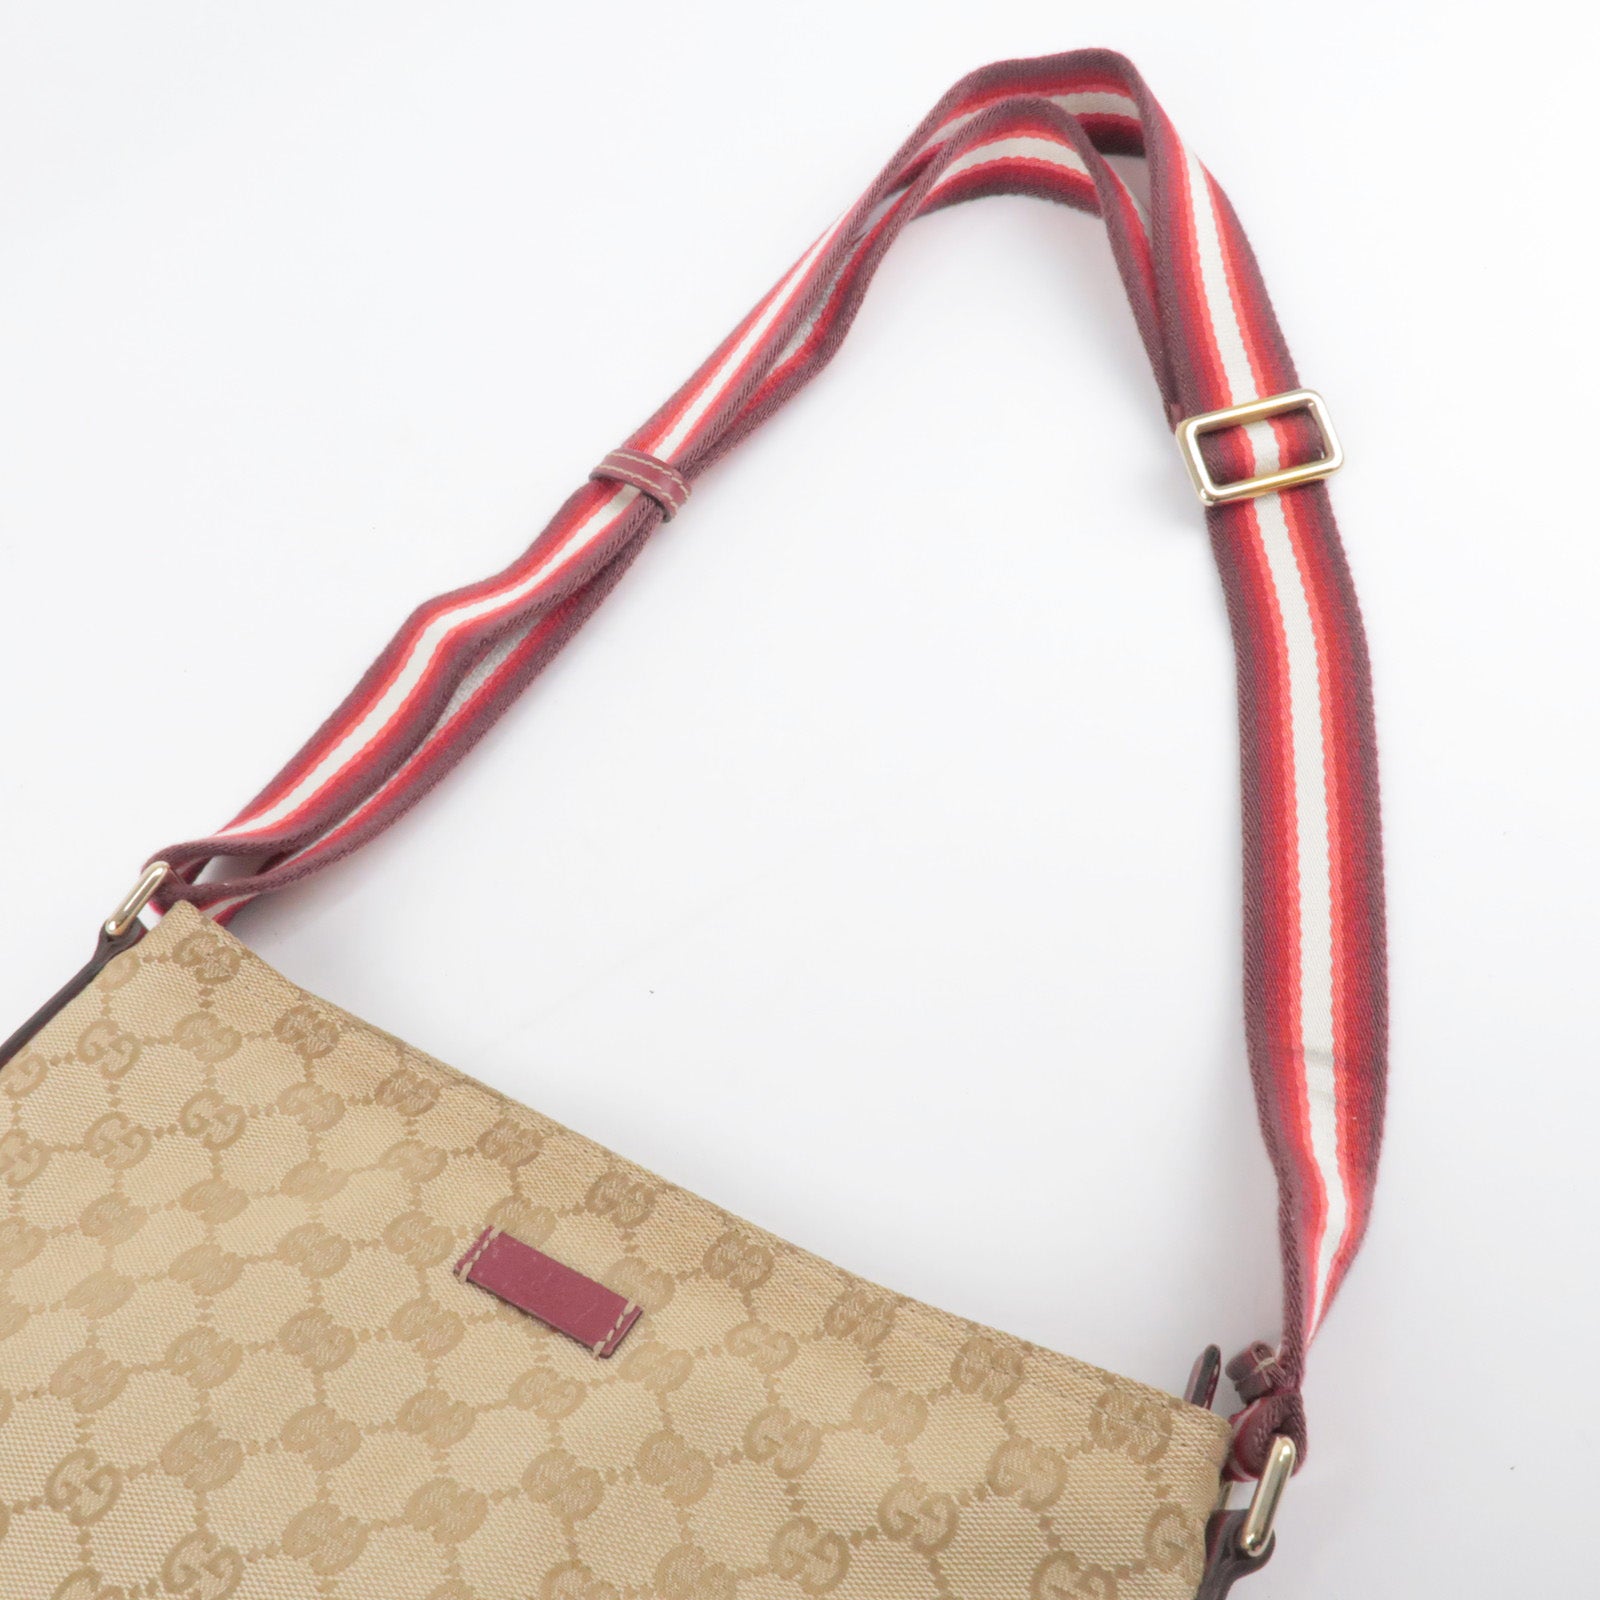 GUCCI-Sherry-GG-Canvas-Leather-Shoulder-Bag-Beige-Red-189749 – dct